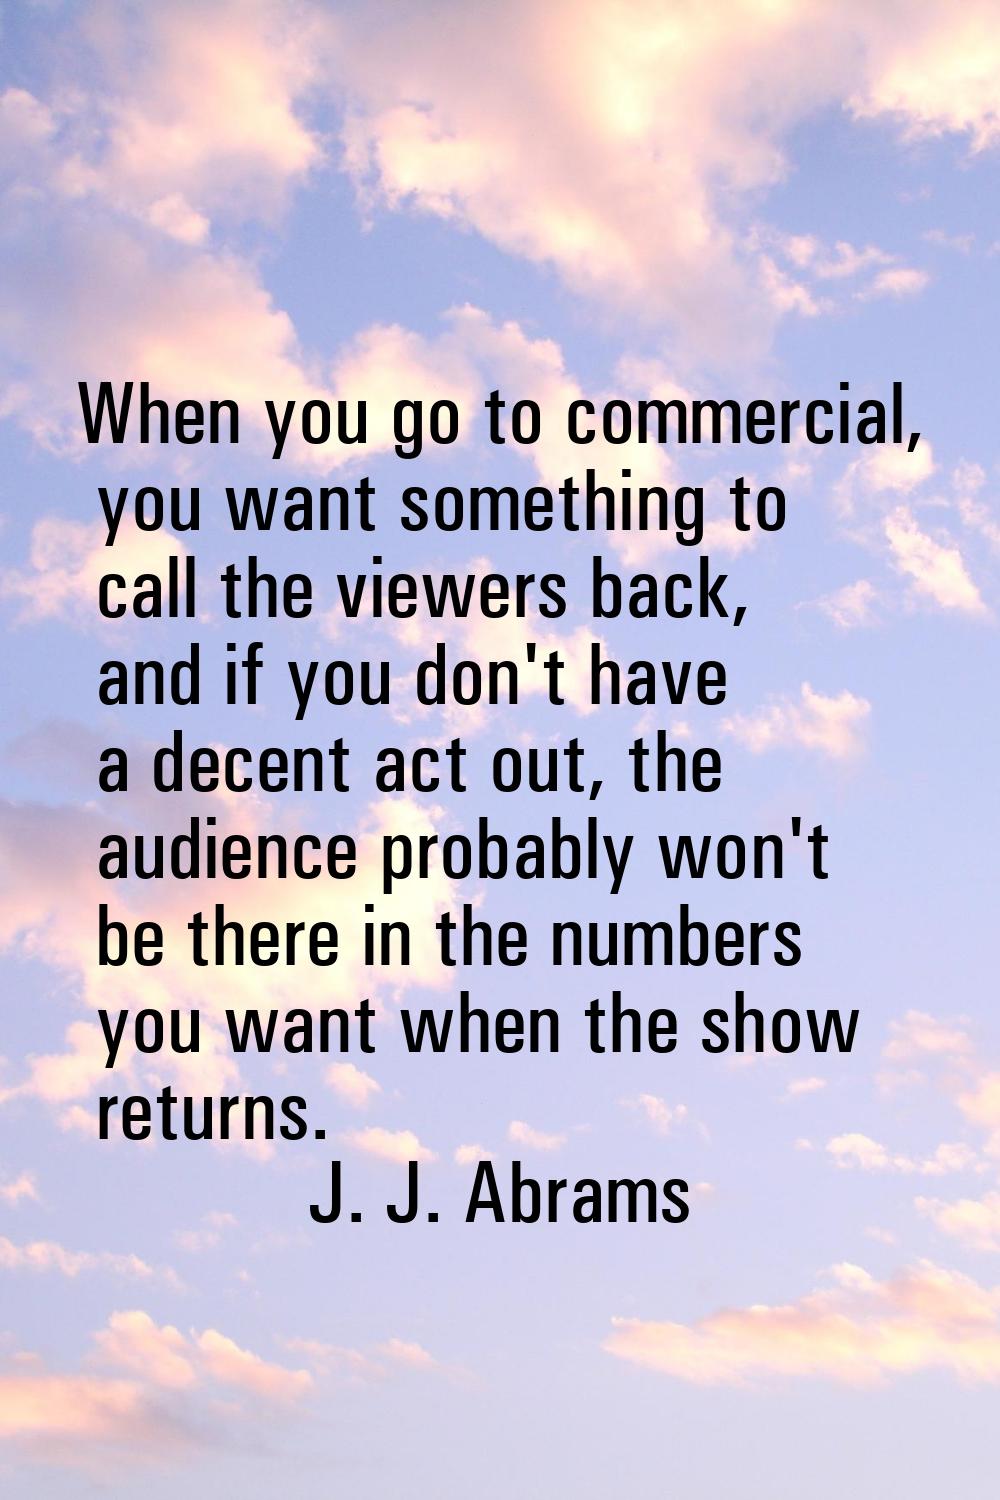 When you go to commercial, you want something to call the viewers back, and if you don't have a dec